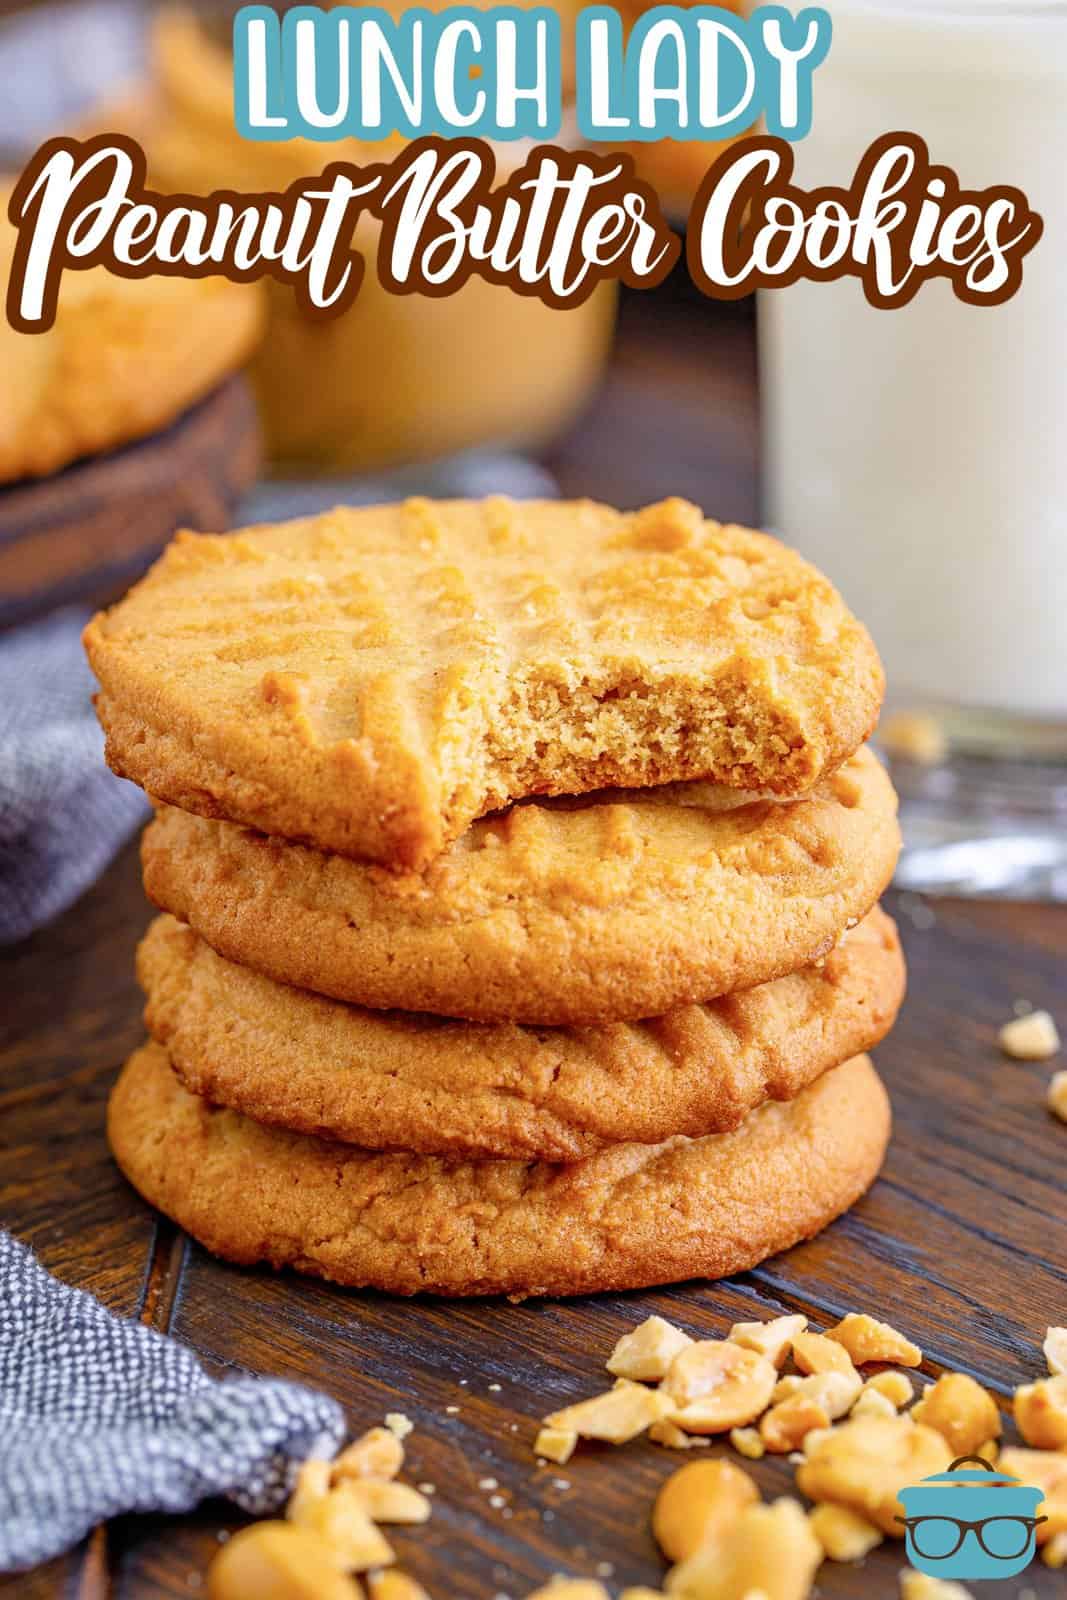 Pinterest image of stacked Lunch Lady Peanut Butter Cookies with bite taken out of top one.